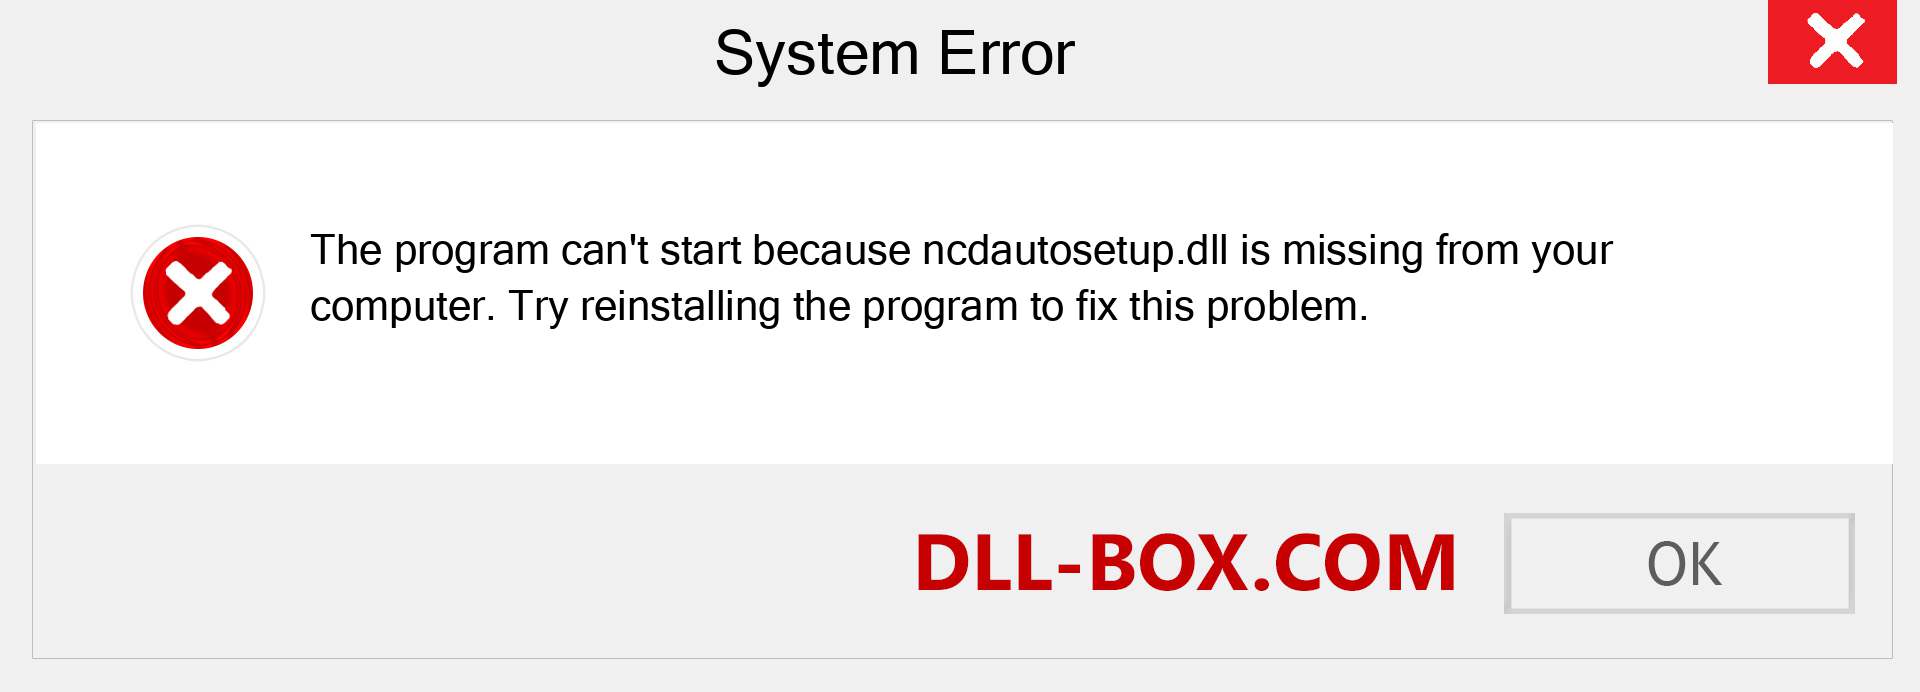  ncdautosetup.dll file is missing?. Download for Windows 7, 8, 10 - Fix  ncdautosetup dll Missing Error on Windows, photos, images